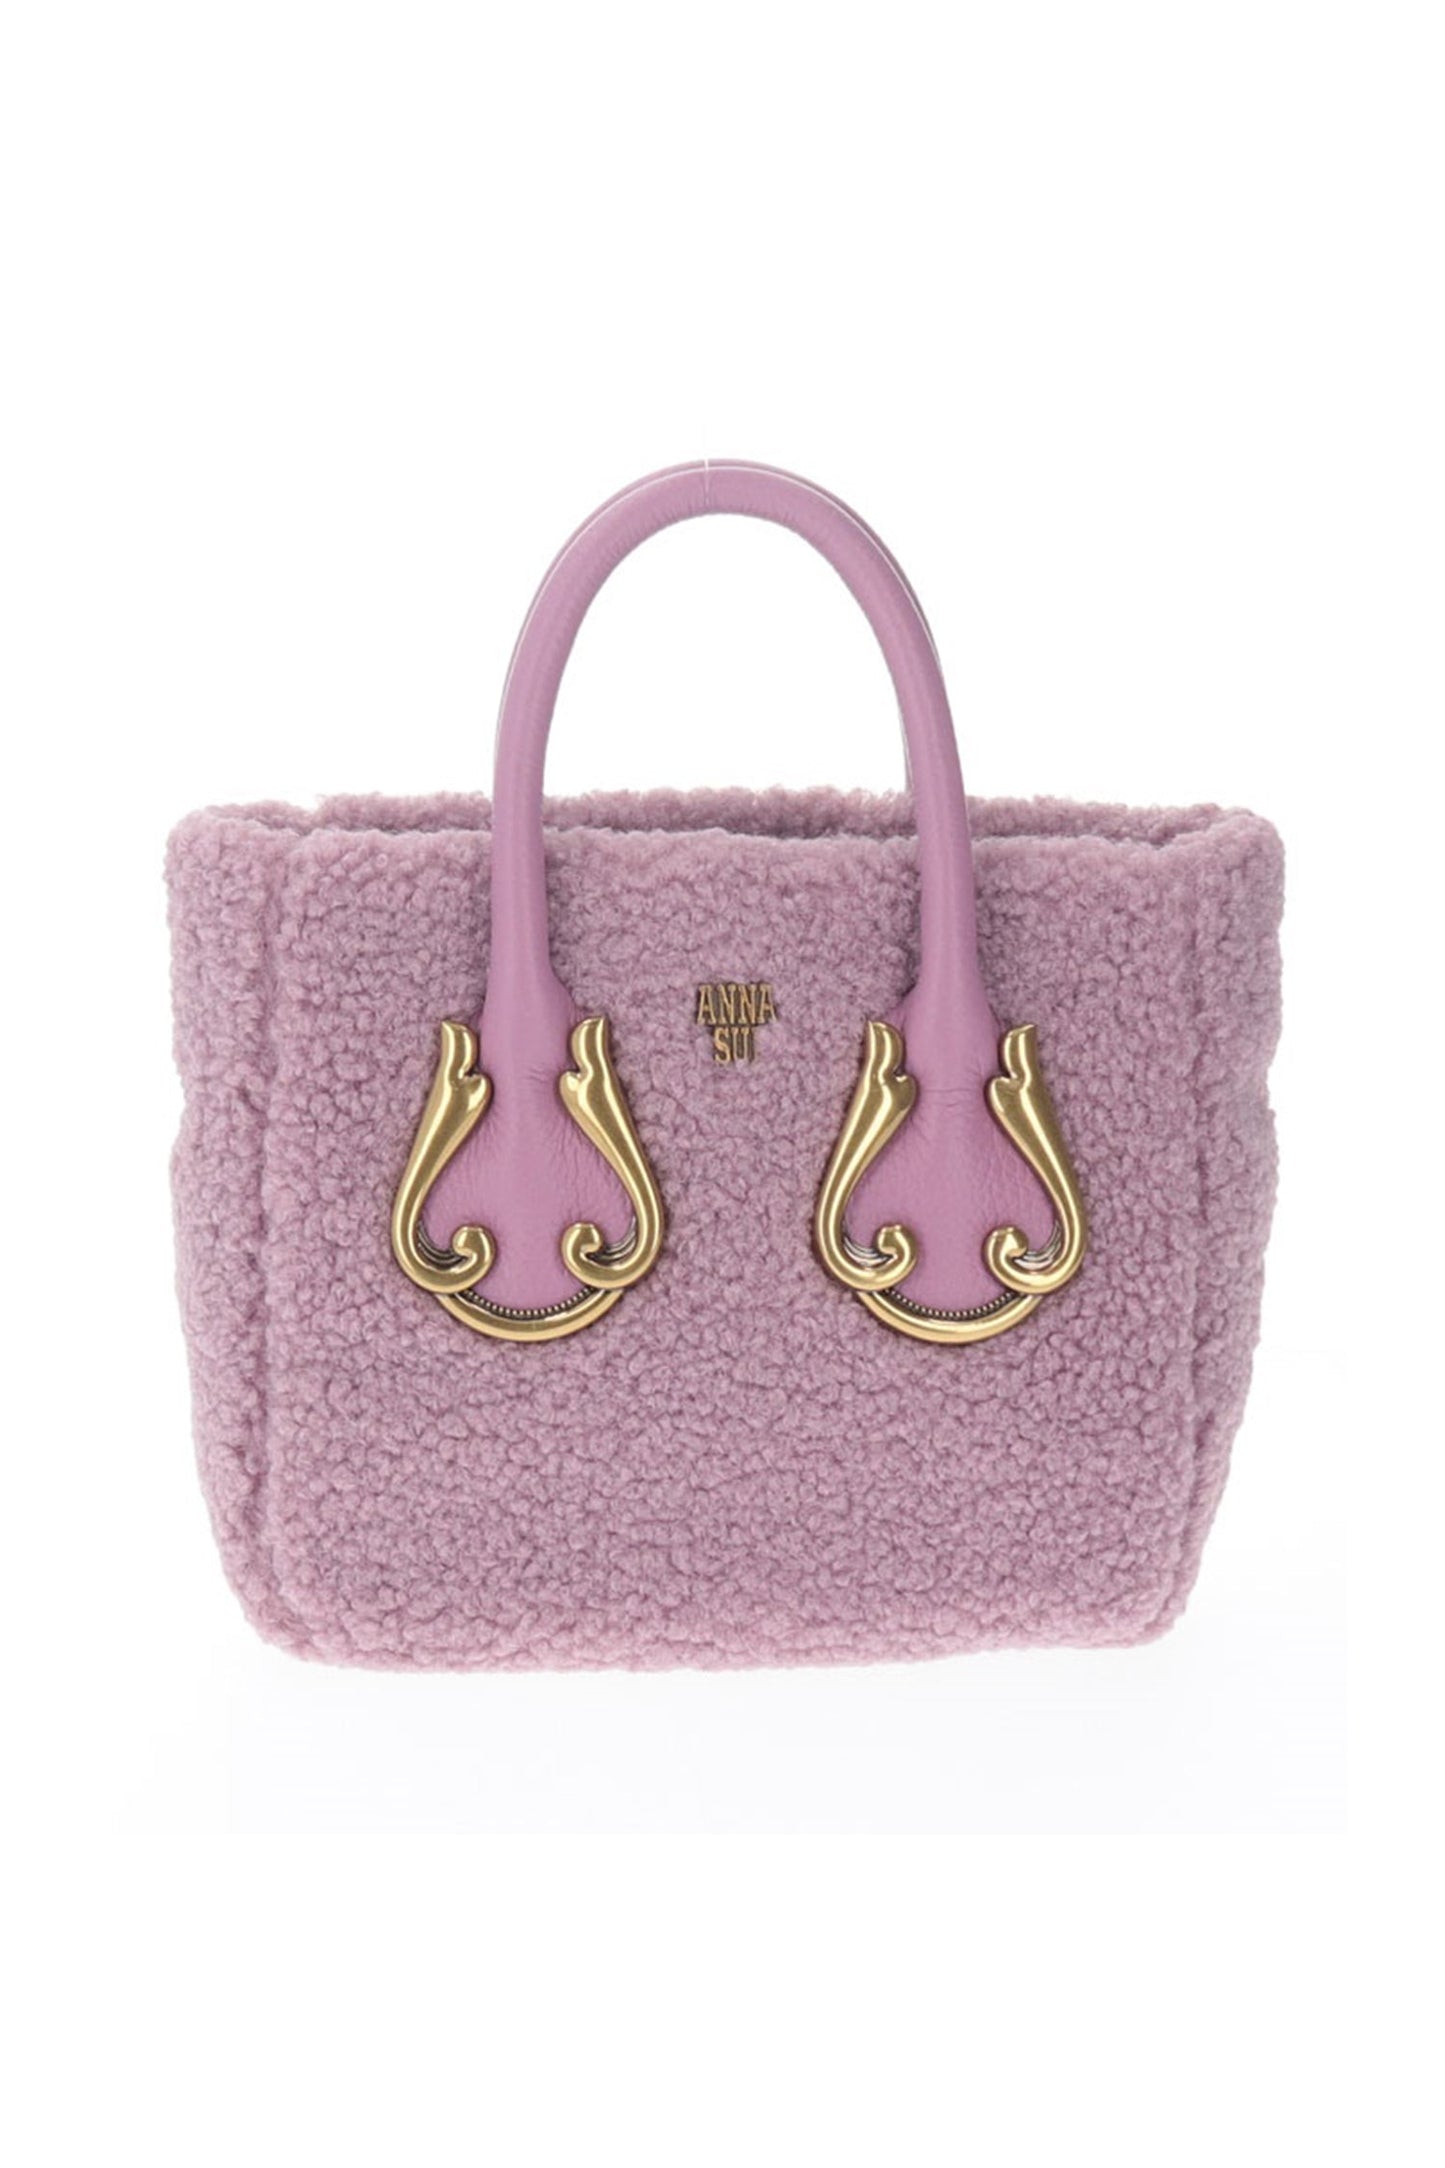 Bag Lavender, Anna Sui logo in the fluffy material, 2-handdles highlighted with a golden arabesque